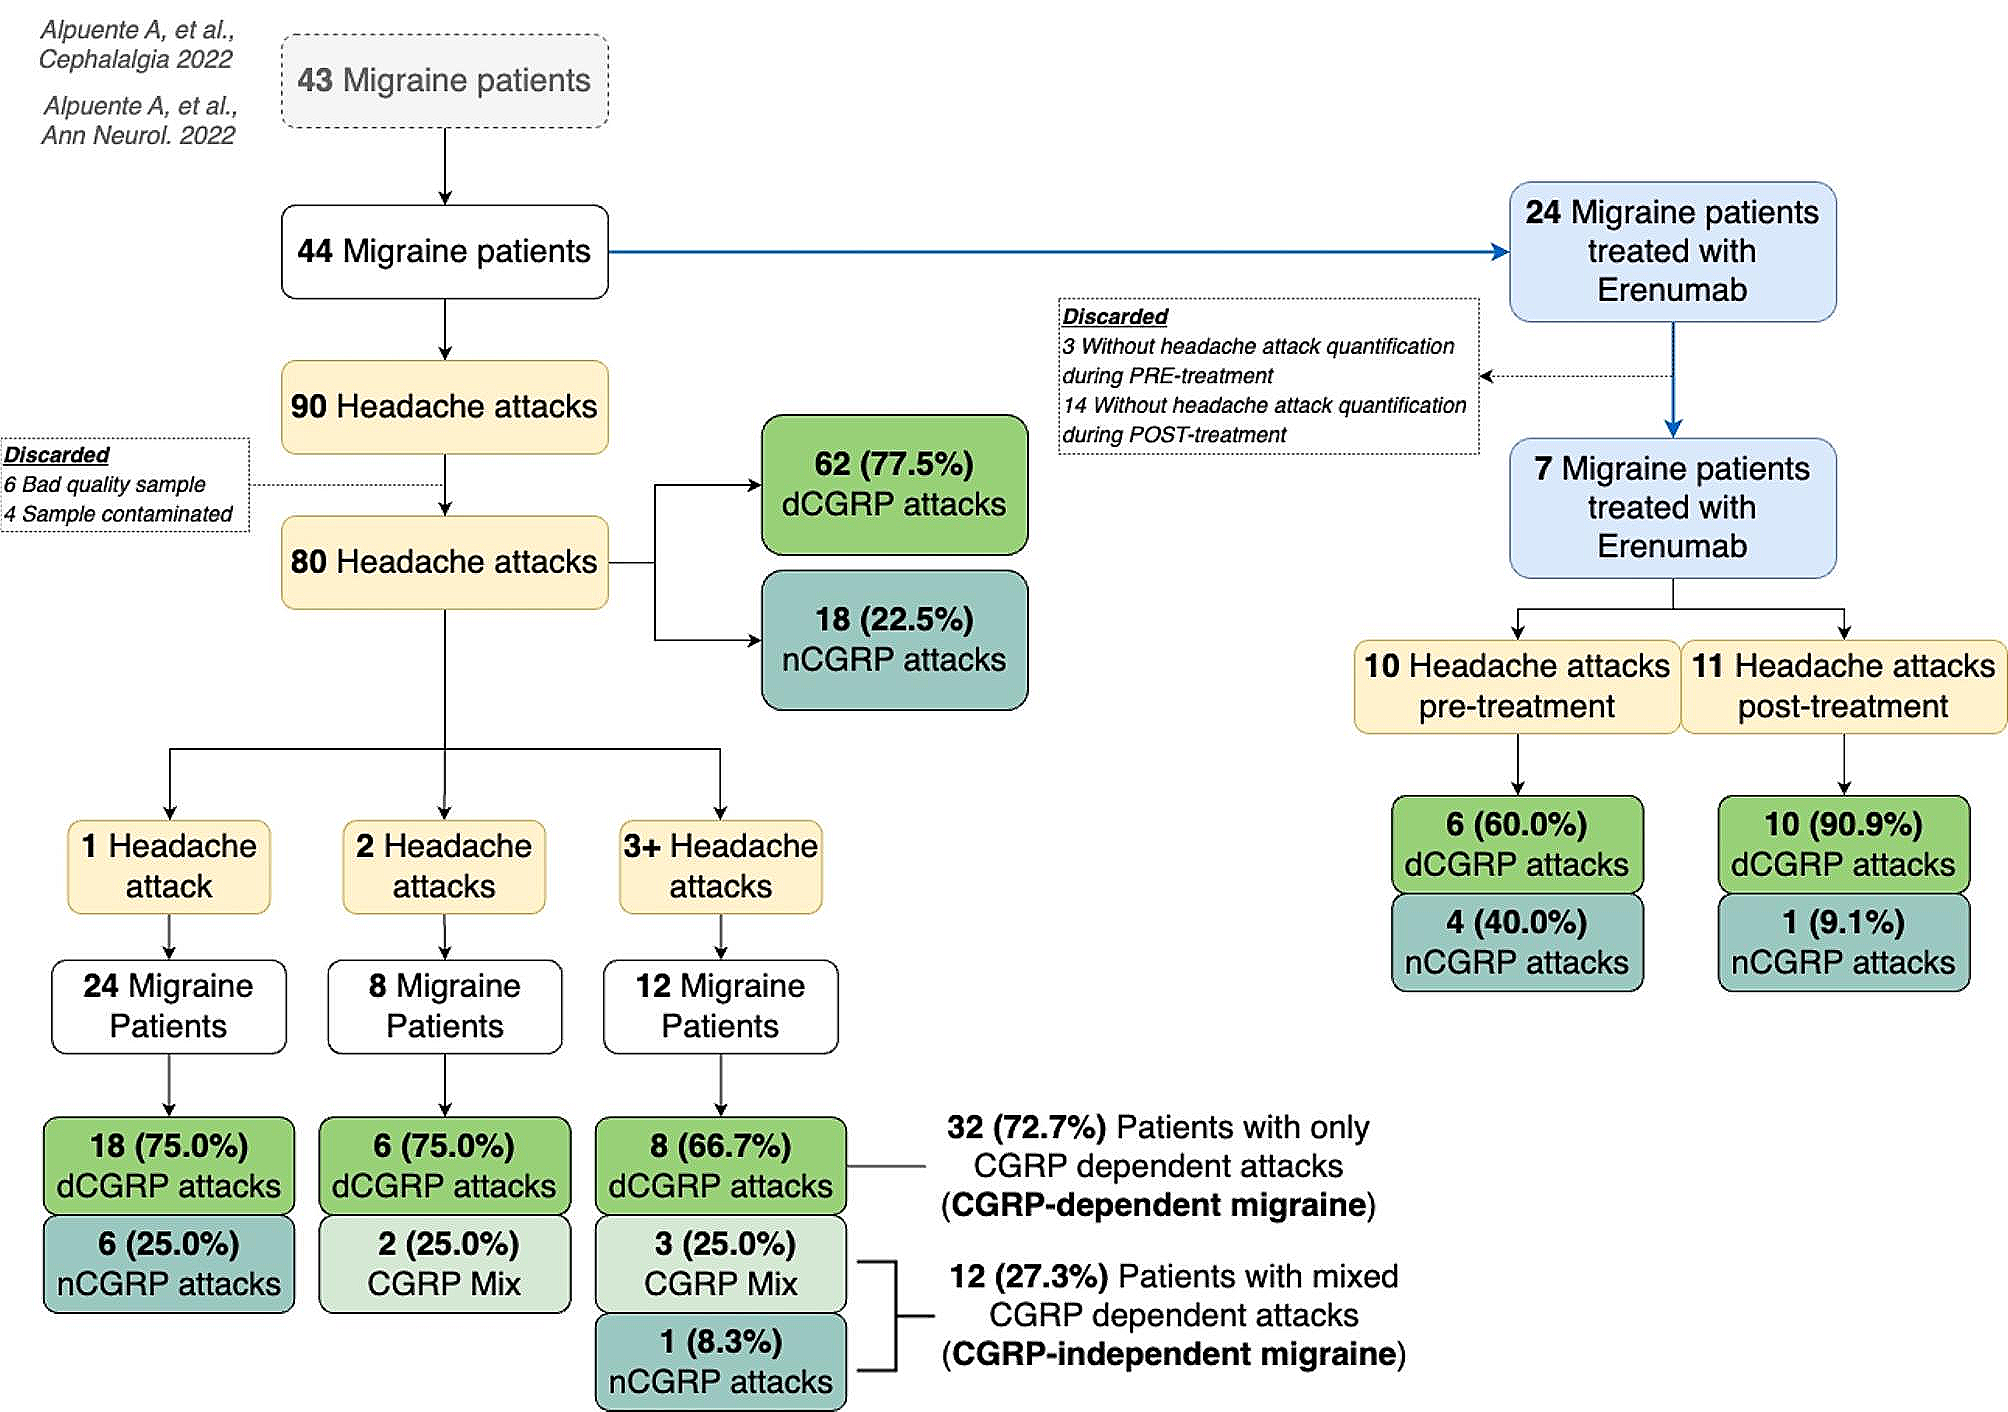 Dynamic fluctuations of salivary CGRP levels during migraine attacks: association with clinical variables and phenotypic characterization